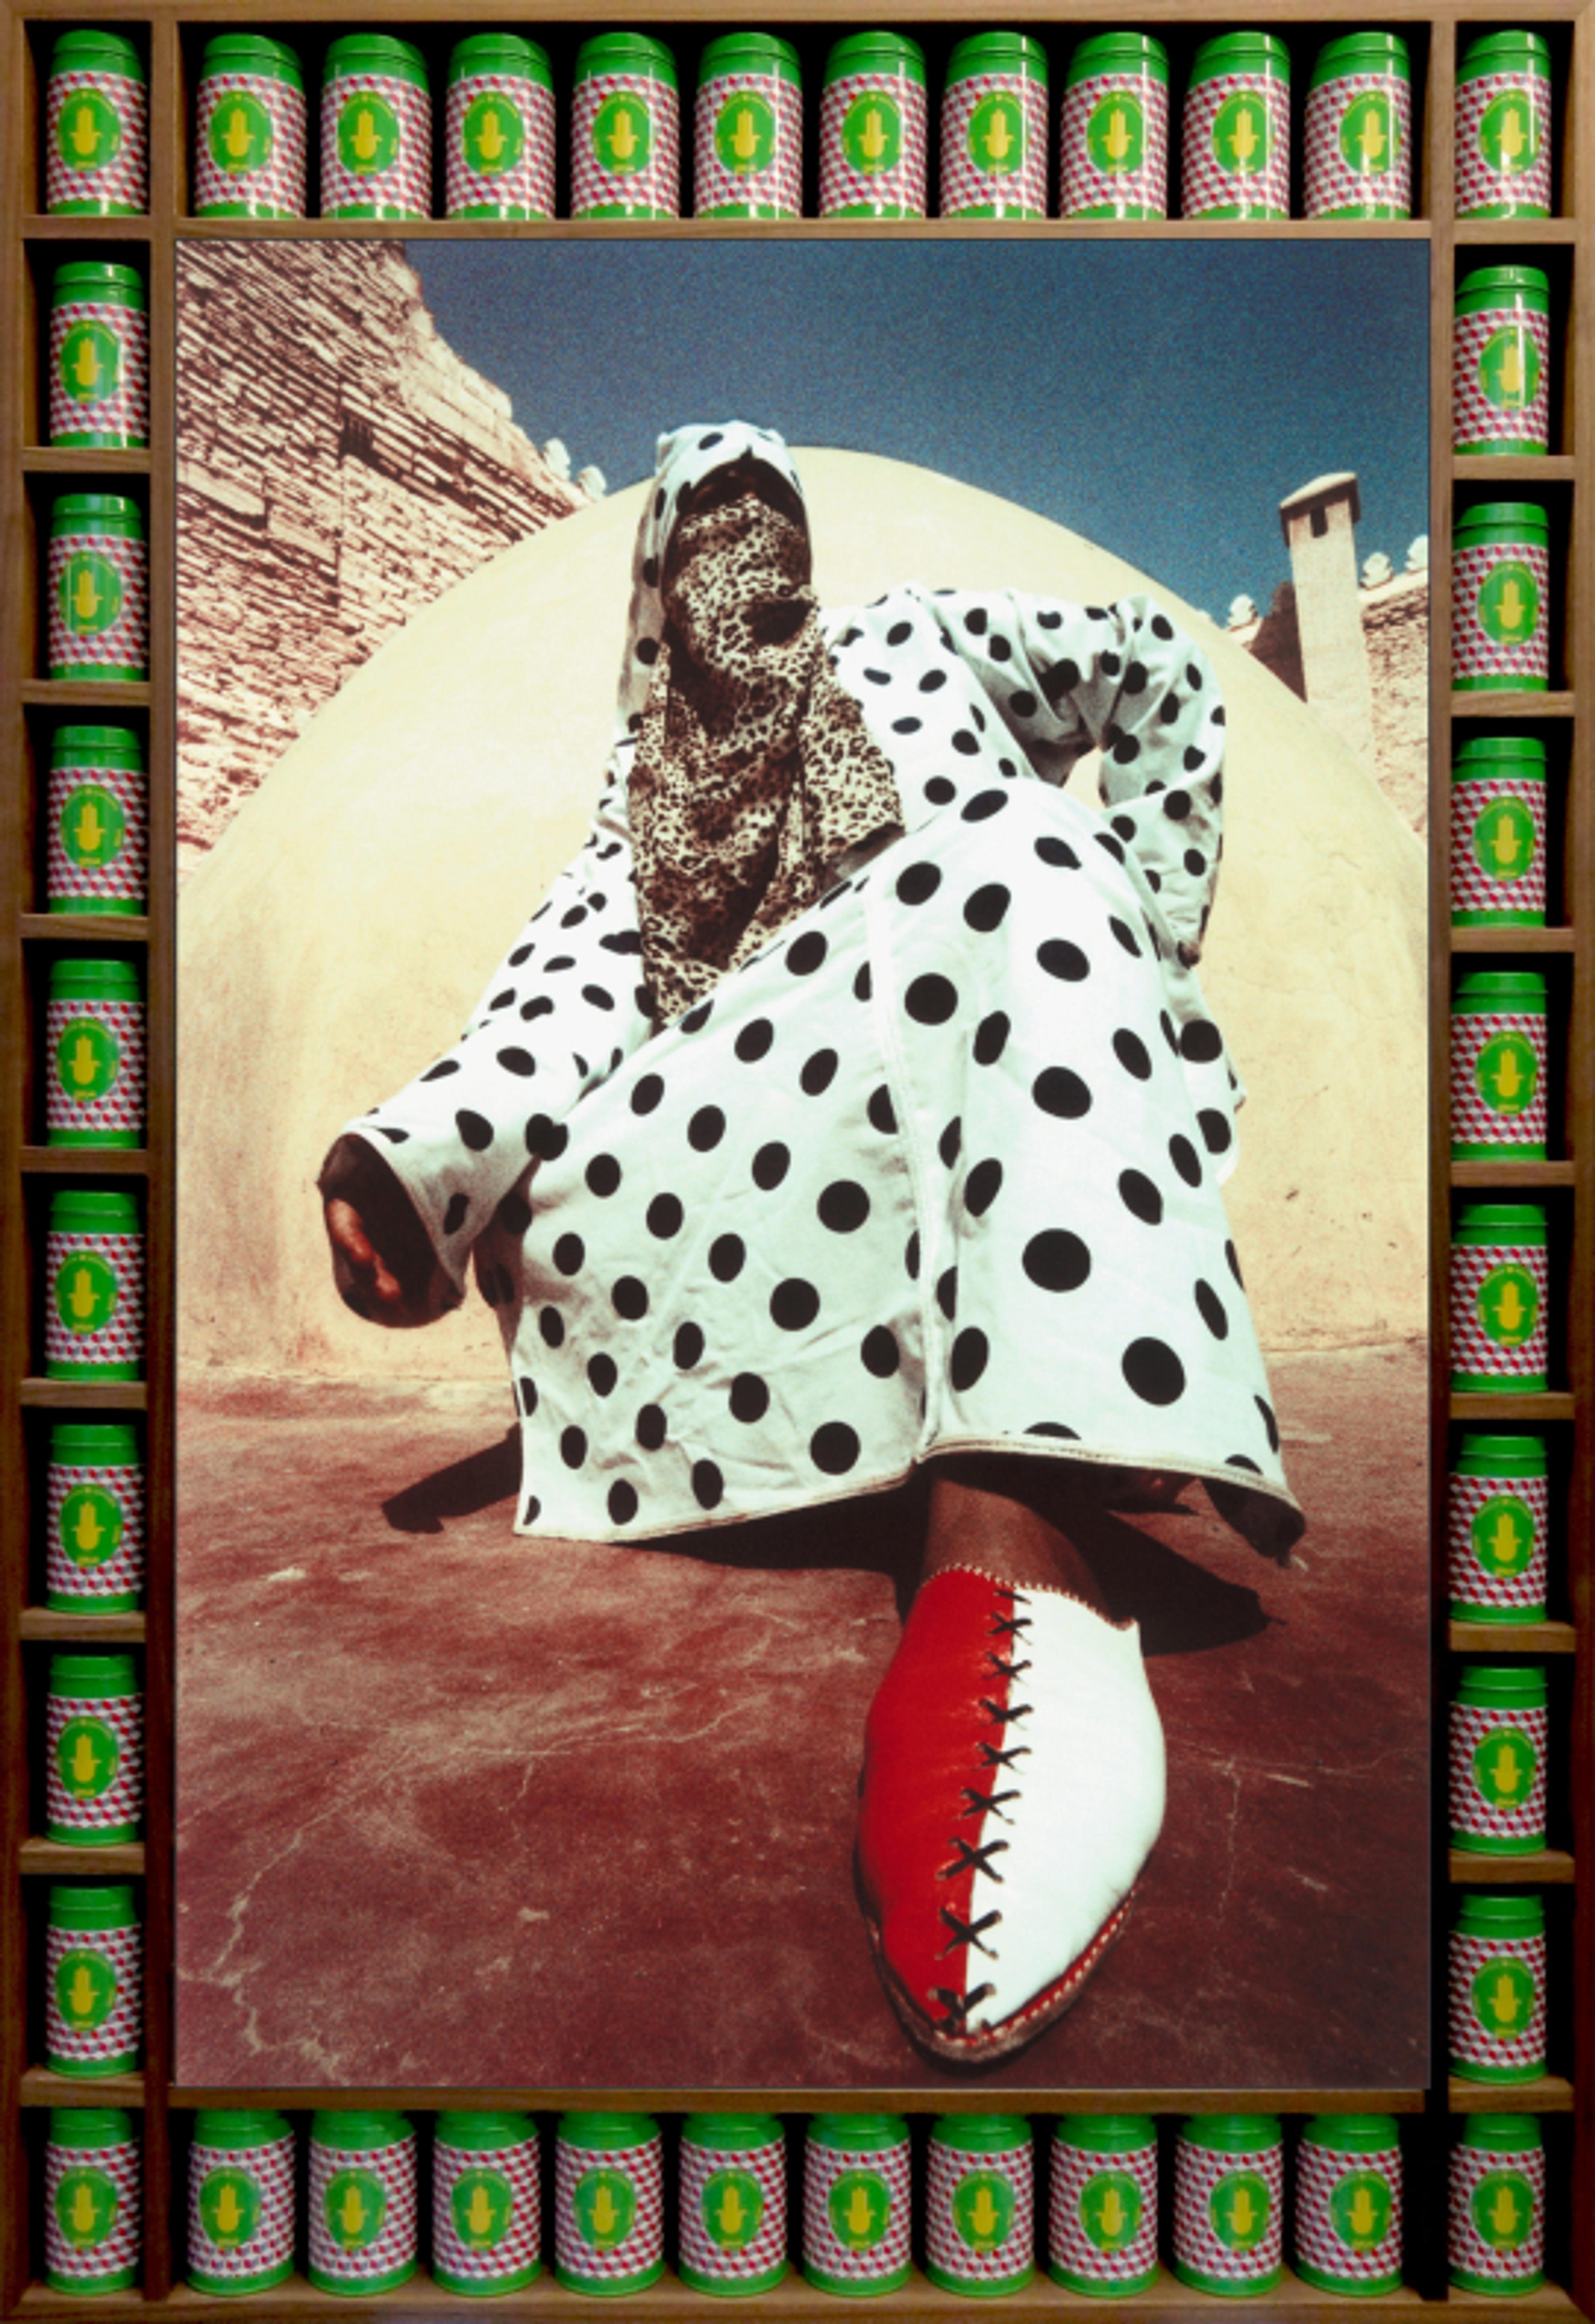 A photograph of a person wearing a polka-dot djellaba and hijab posing in a squat position